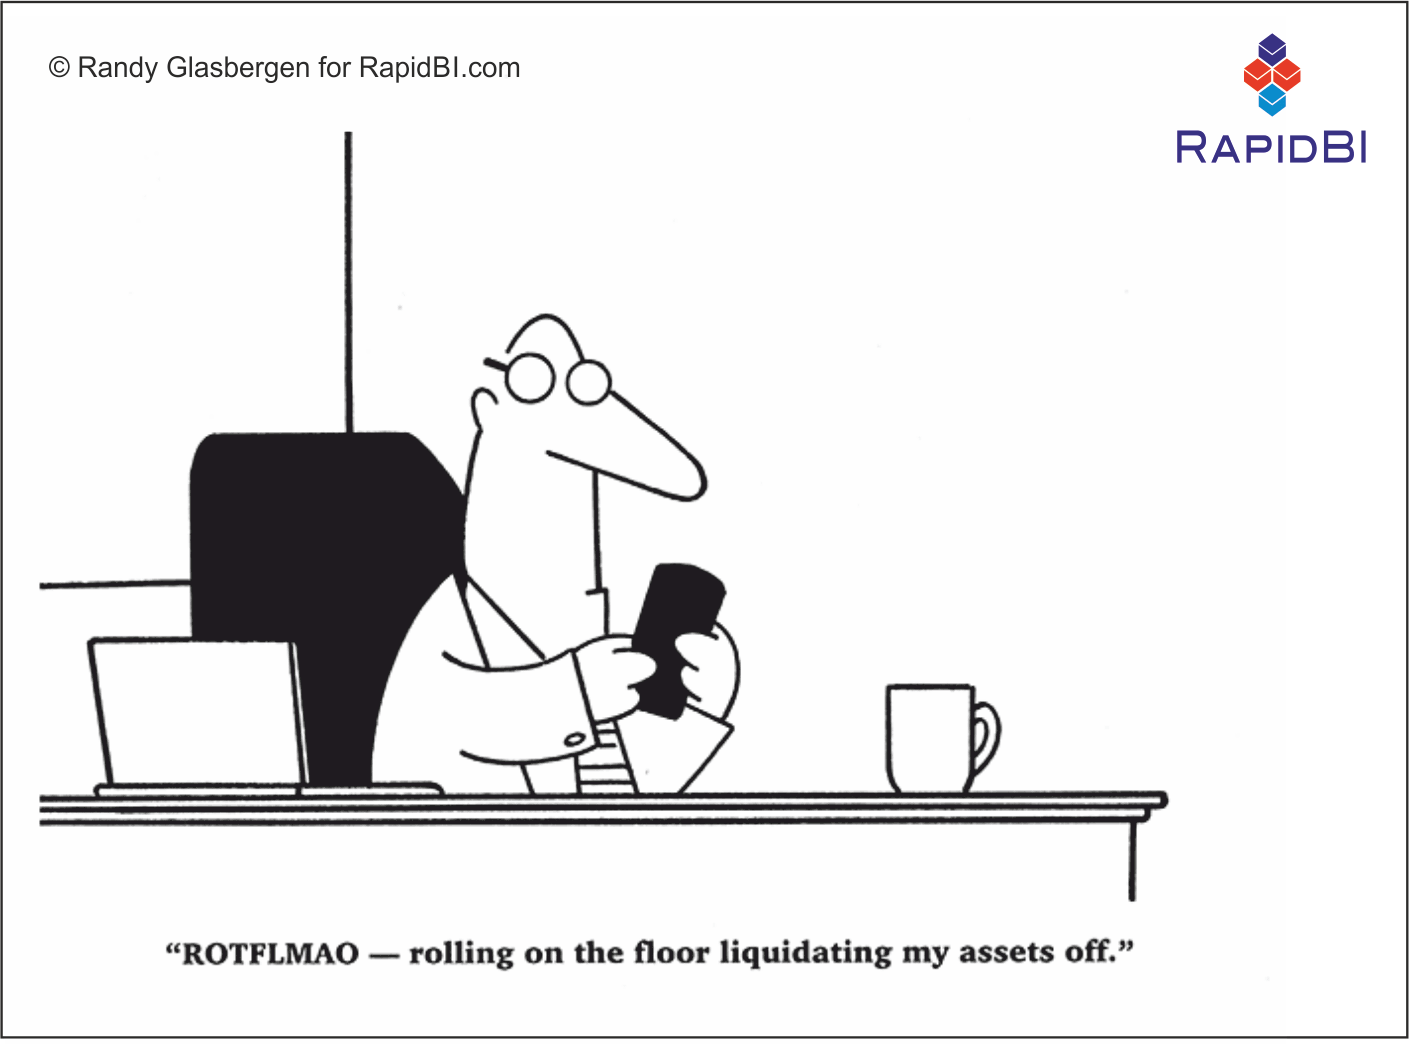 RapidBI Daily Cartoon #20 A look at the lighter side of work life